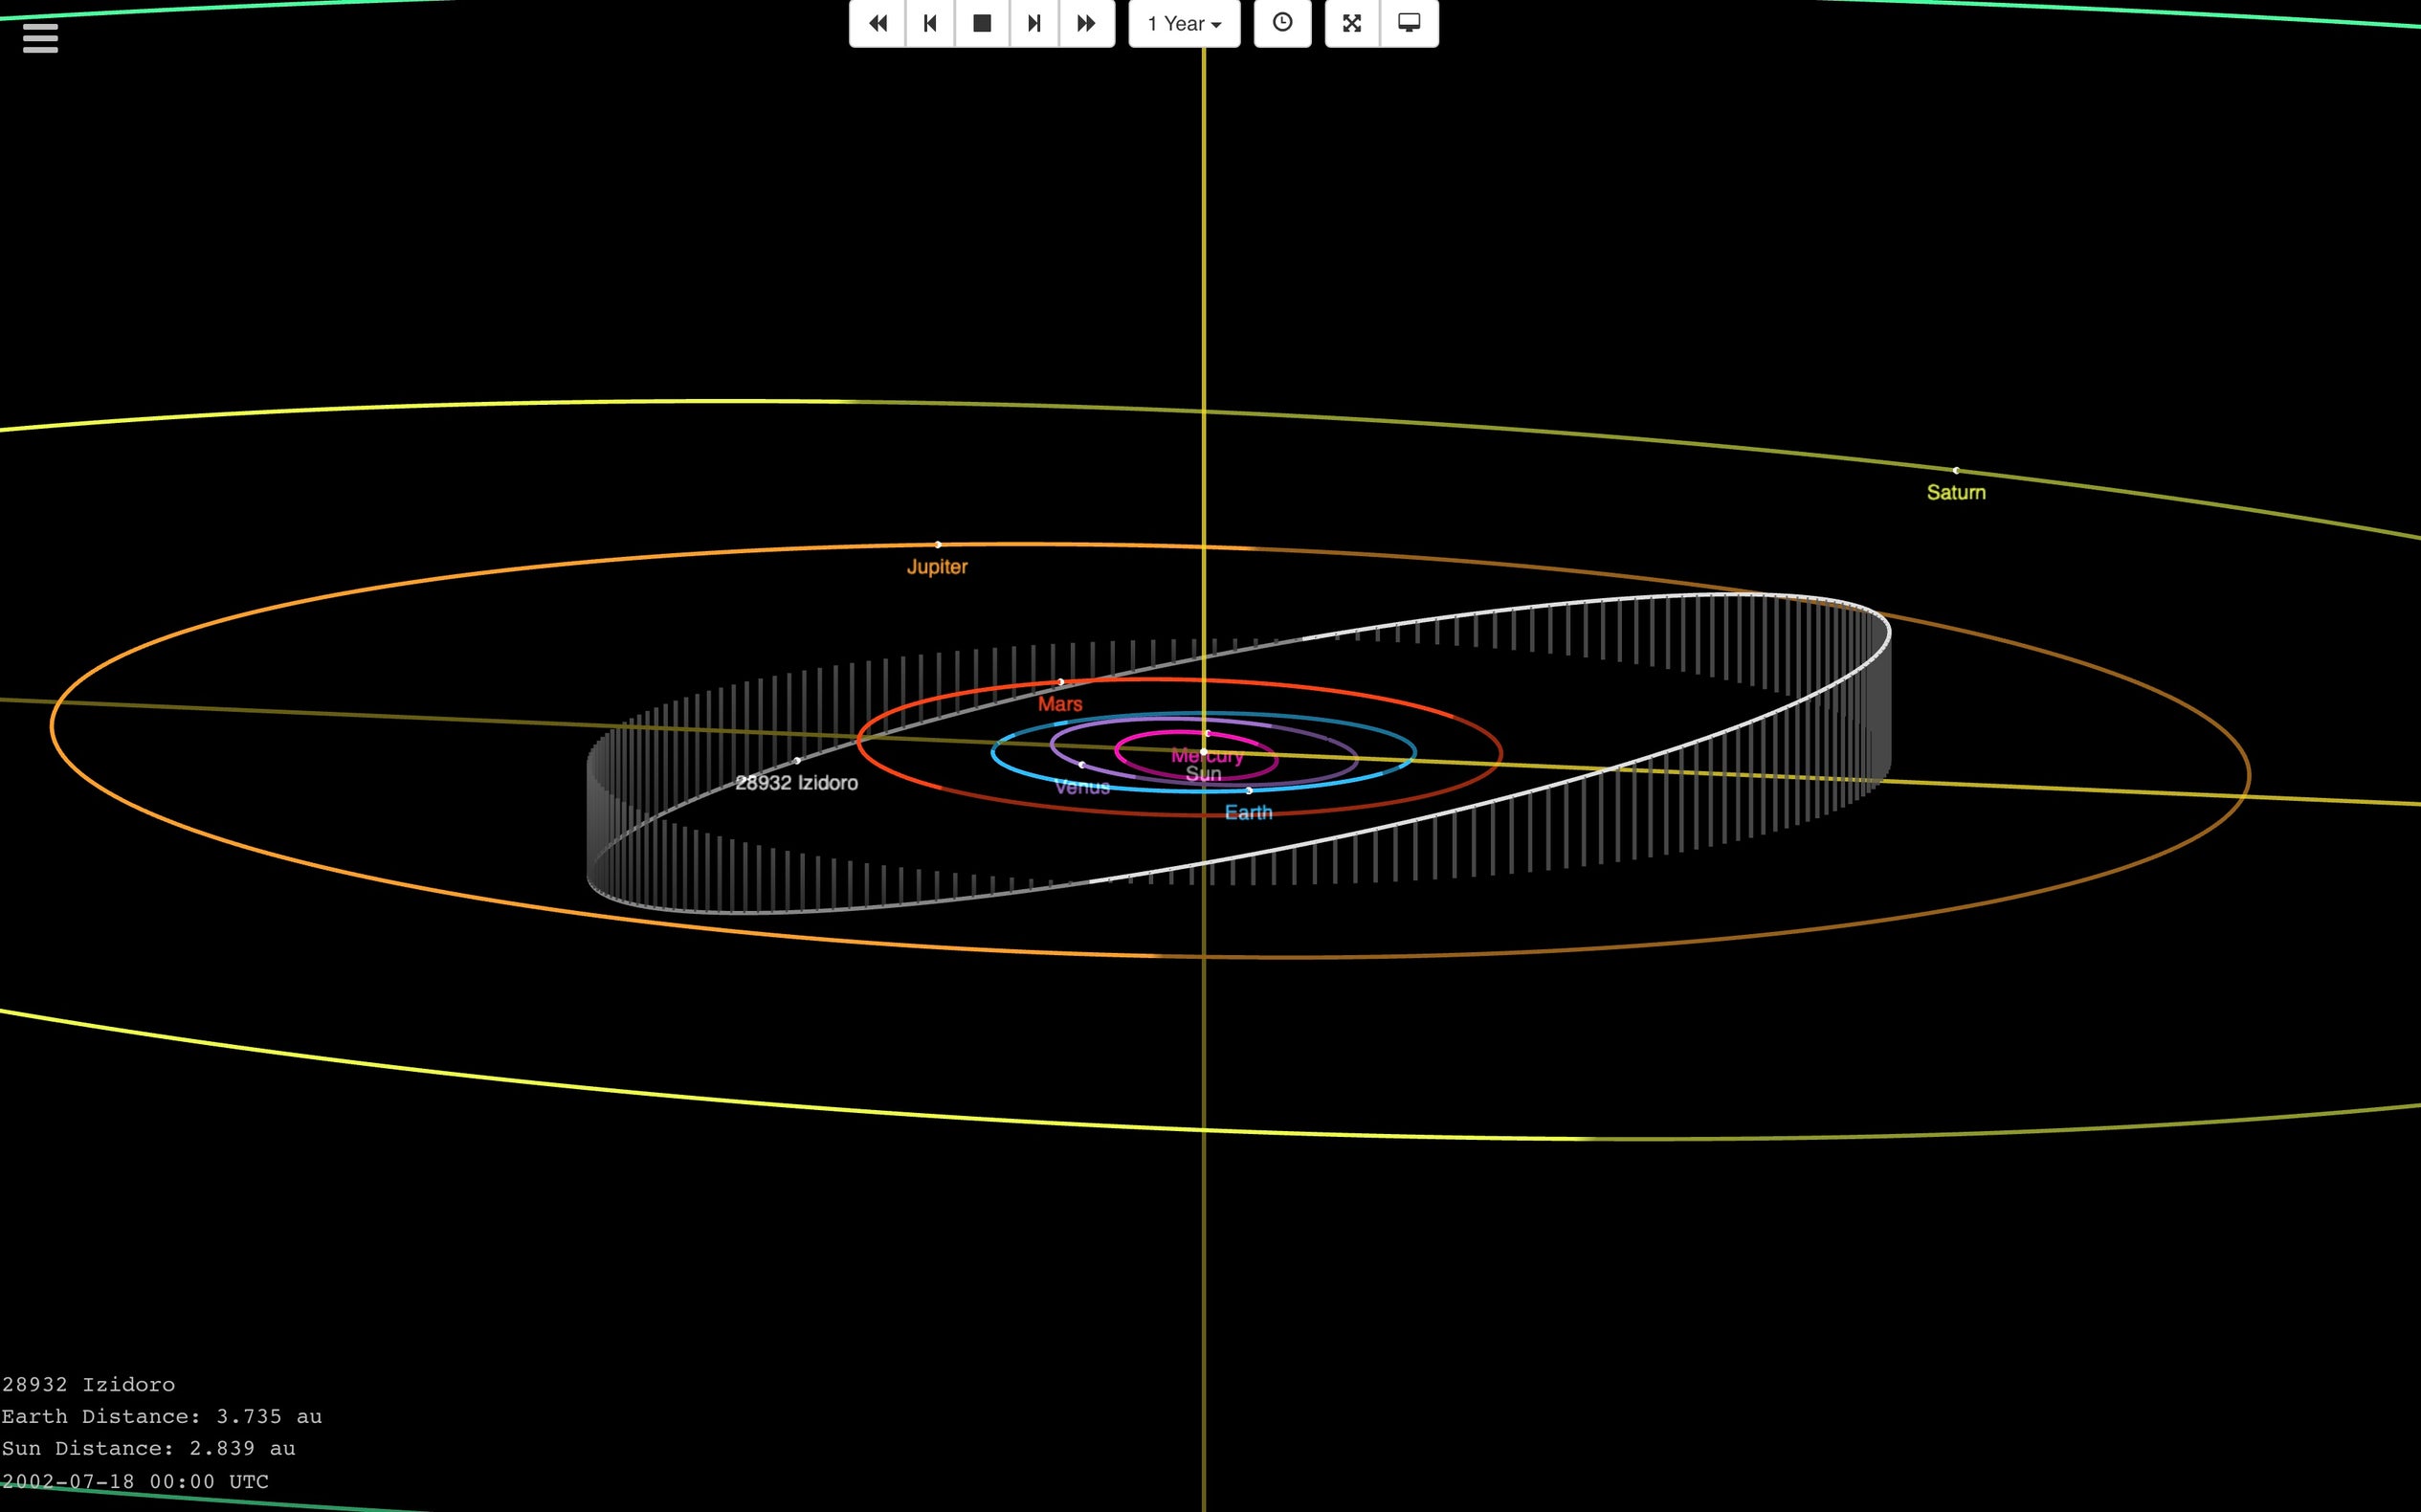 graphic of asteroid 28932 Izidoro's orbit from the small bodies website